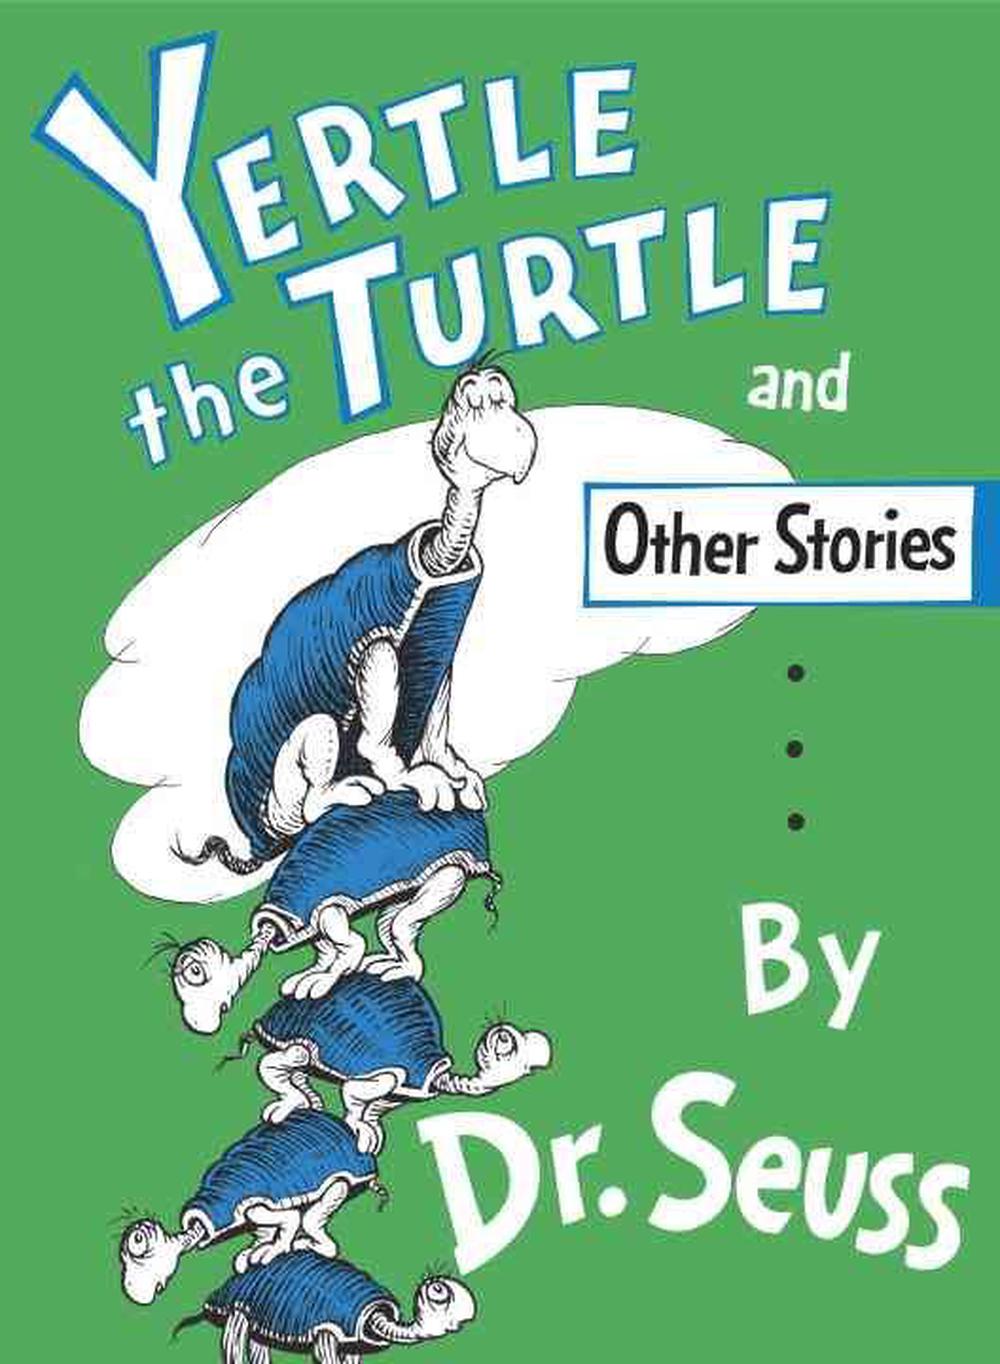 books with yertle the turtle